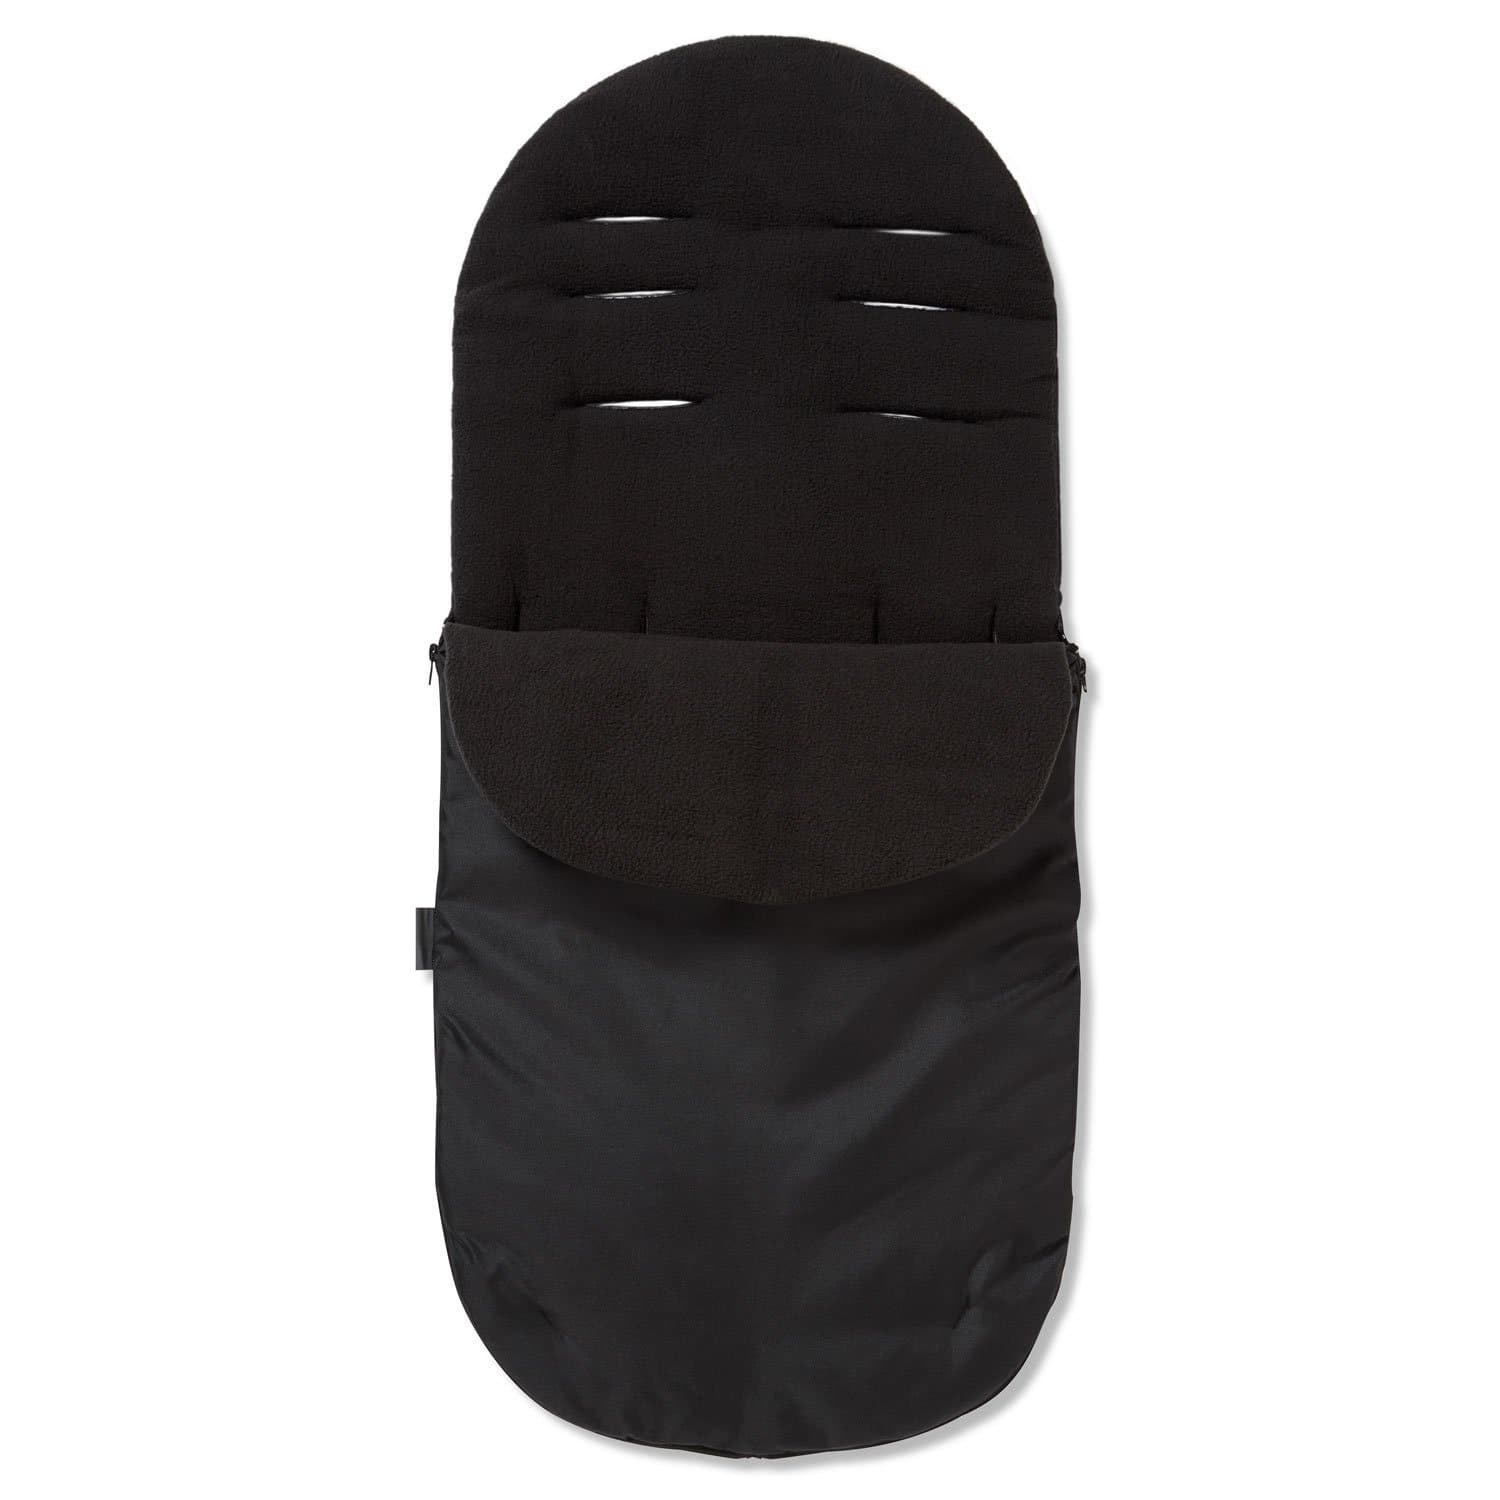 Universal Footmuff / Cosy Toes - Fits All Pushchairs / Prams And Buggies - Black / Fits All Models | For Your Little One